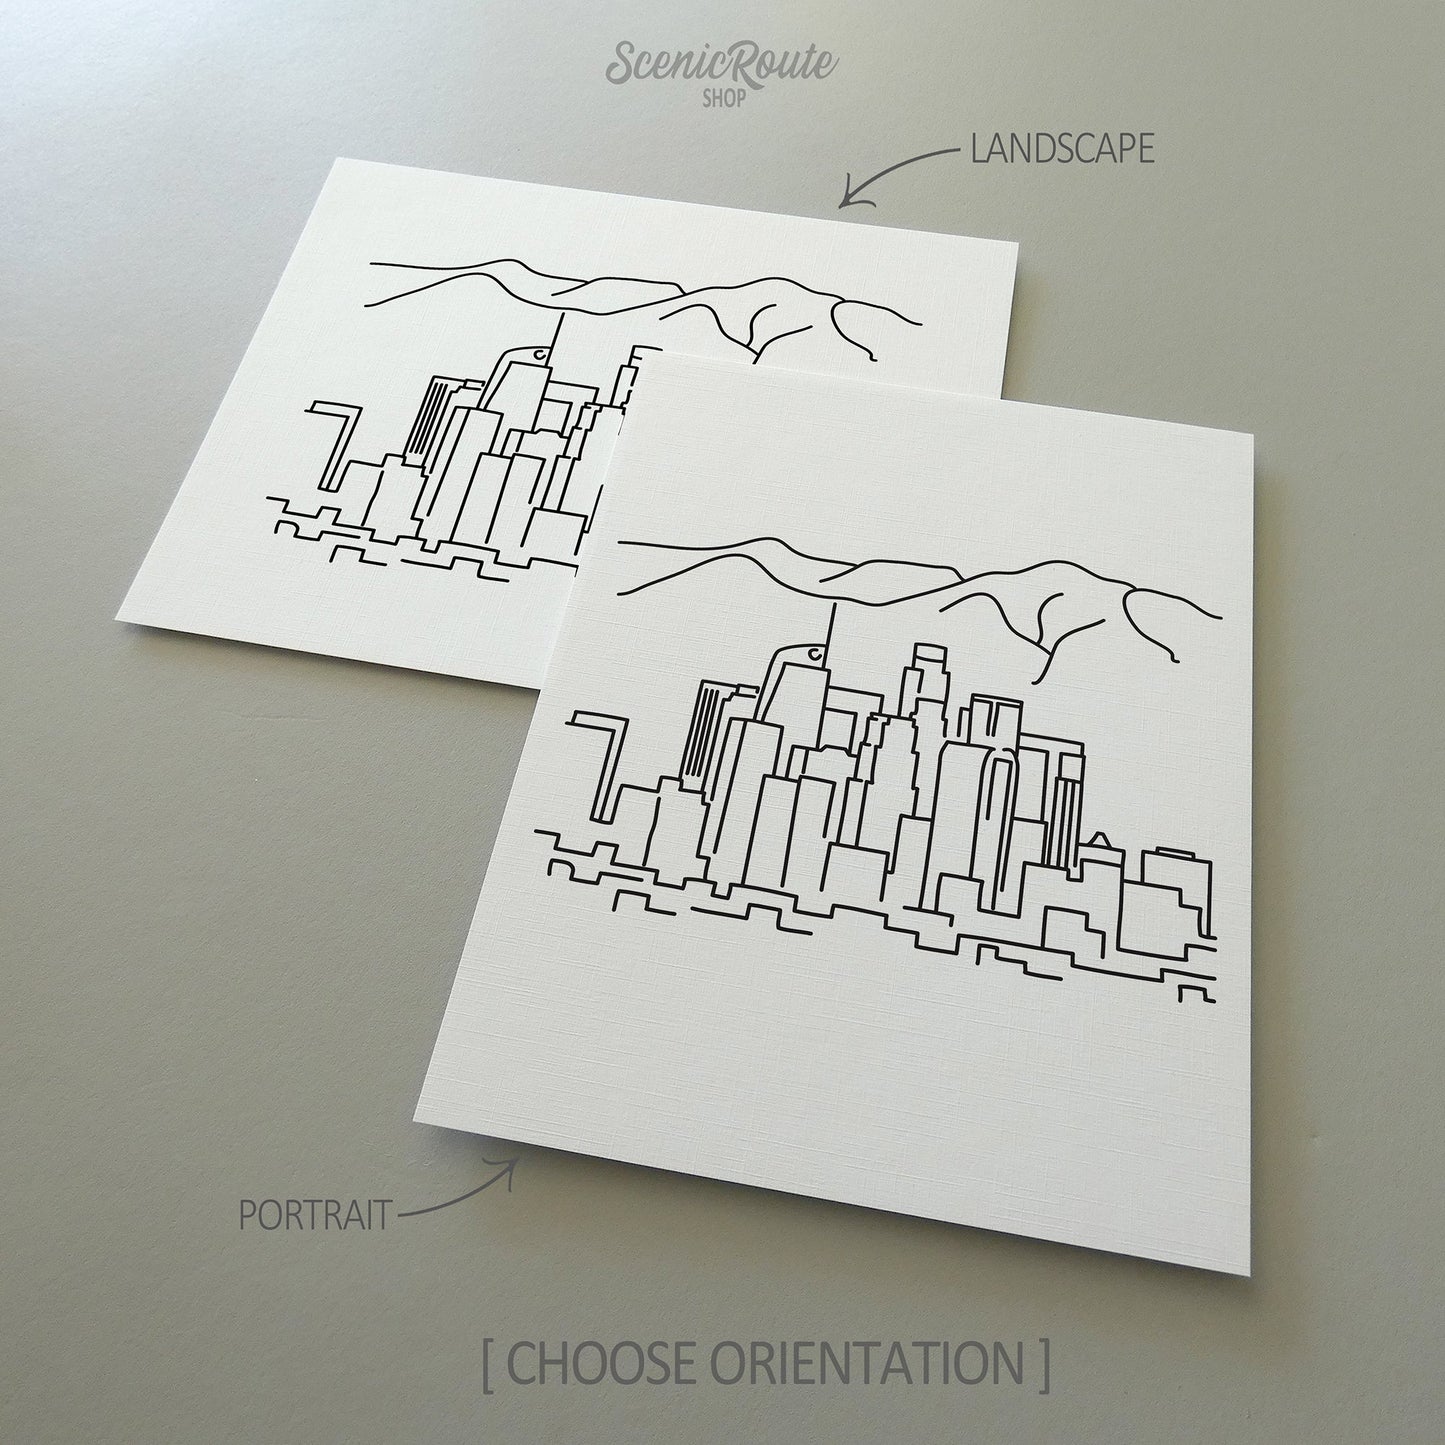 Two line art drawings of the Los Angeles Skyline on white linen paper with a gray background.  The pieces are shown in portrait and landscape orientation for the available art print options.